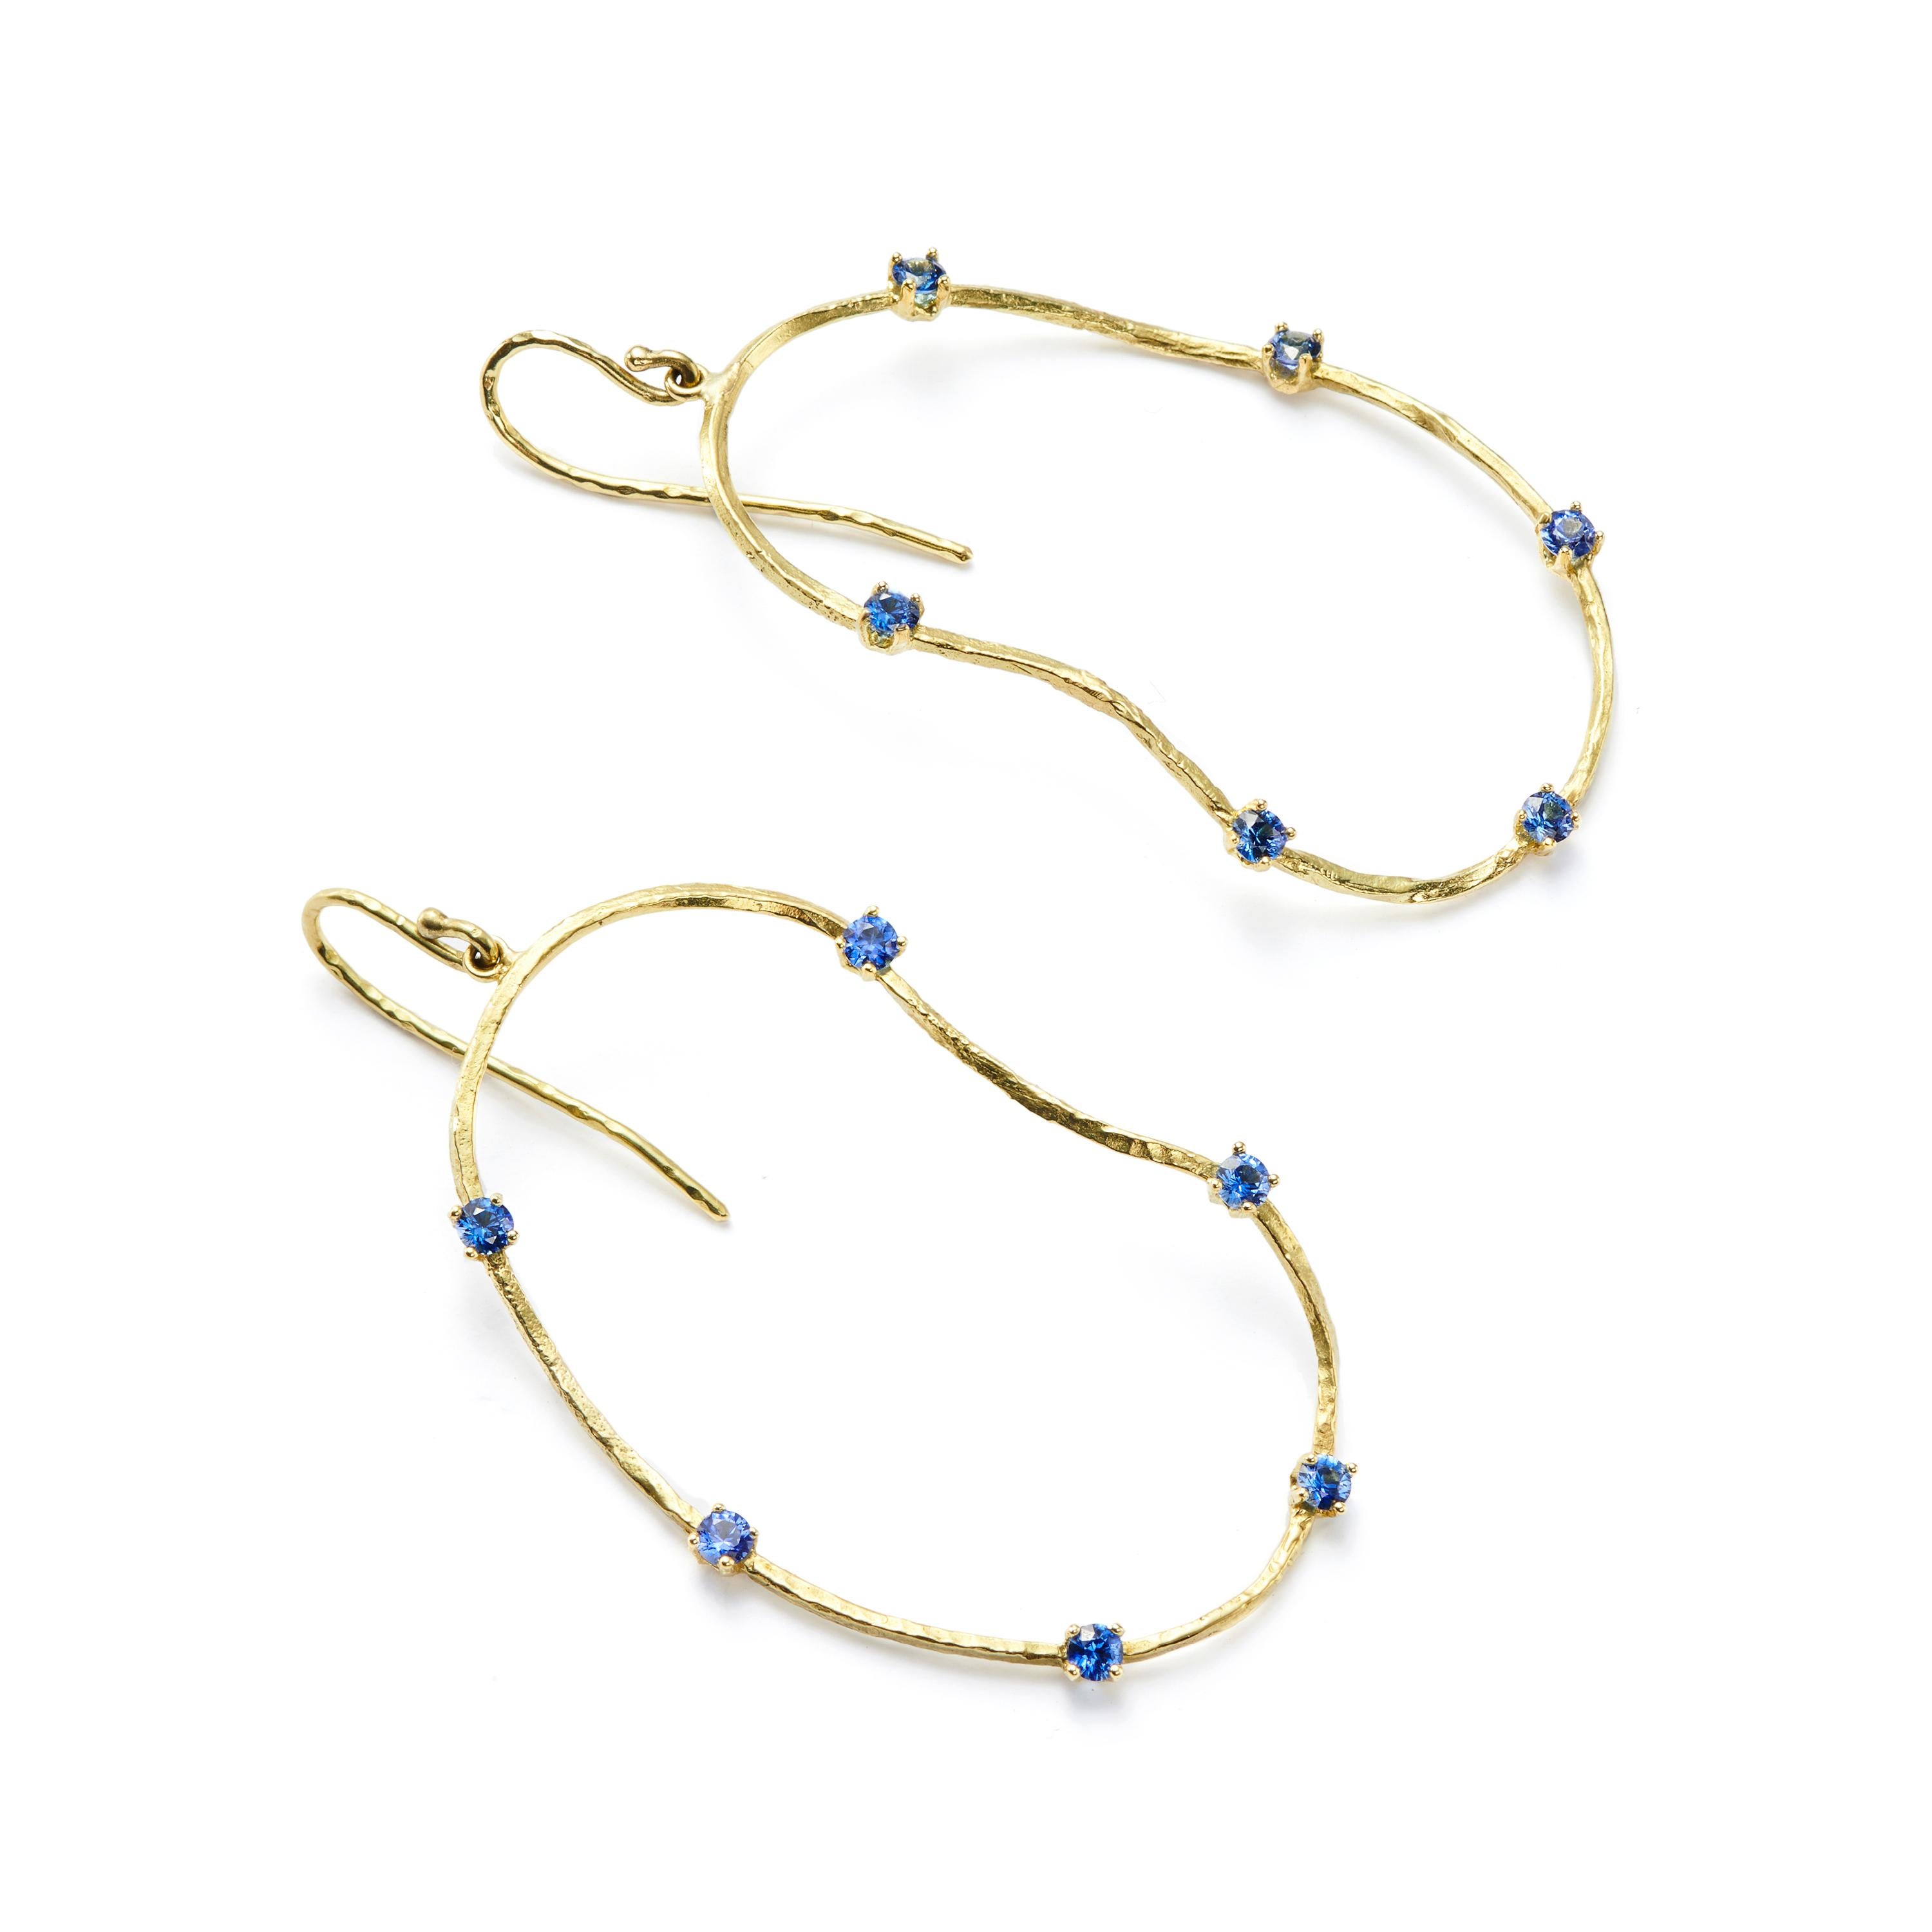 Our oysters with a twist feature brilliant cut, bright blue Sapphires, sprinkled on 18 Karat Gold shell-inspired earrings. The perfect serving of style and sophistication. Lightweight, these are perfect as an everyday earring.

Sapphires: 0.35